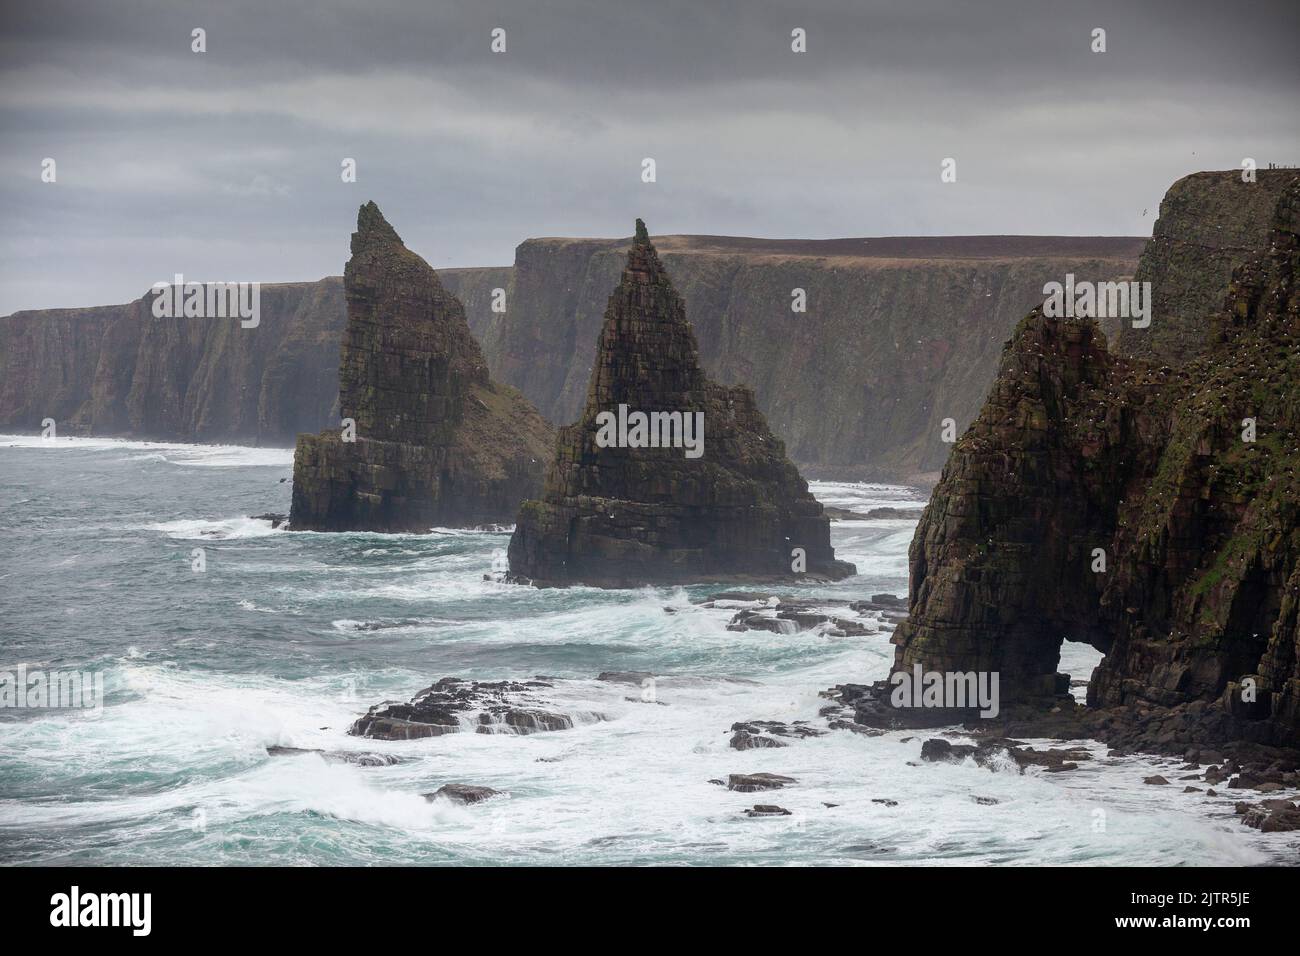 The Stacks of Duncansby. Duncansby Sea Stacks near John O Groats, Scotland Stock Photo